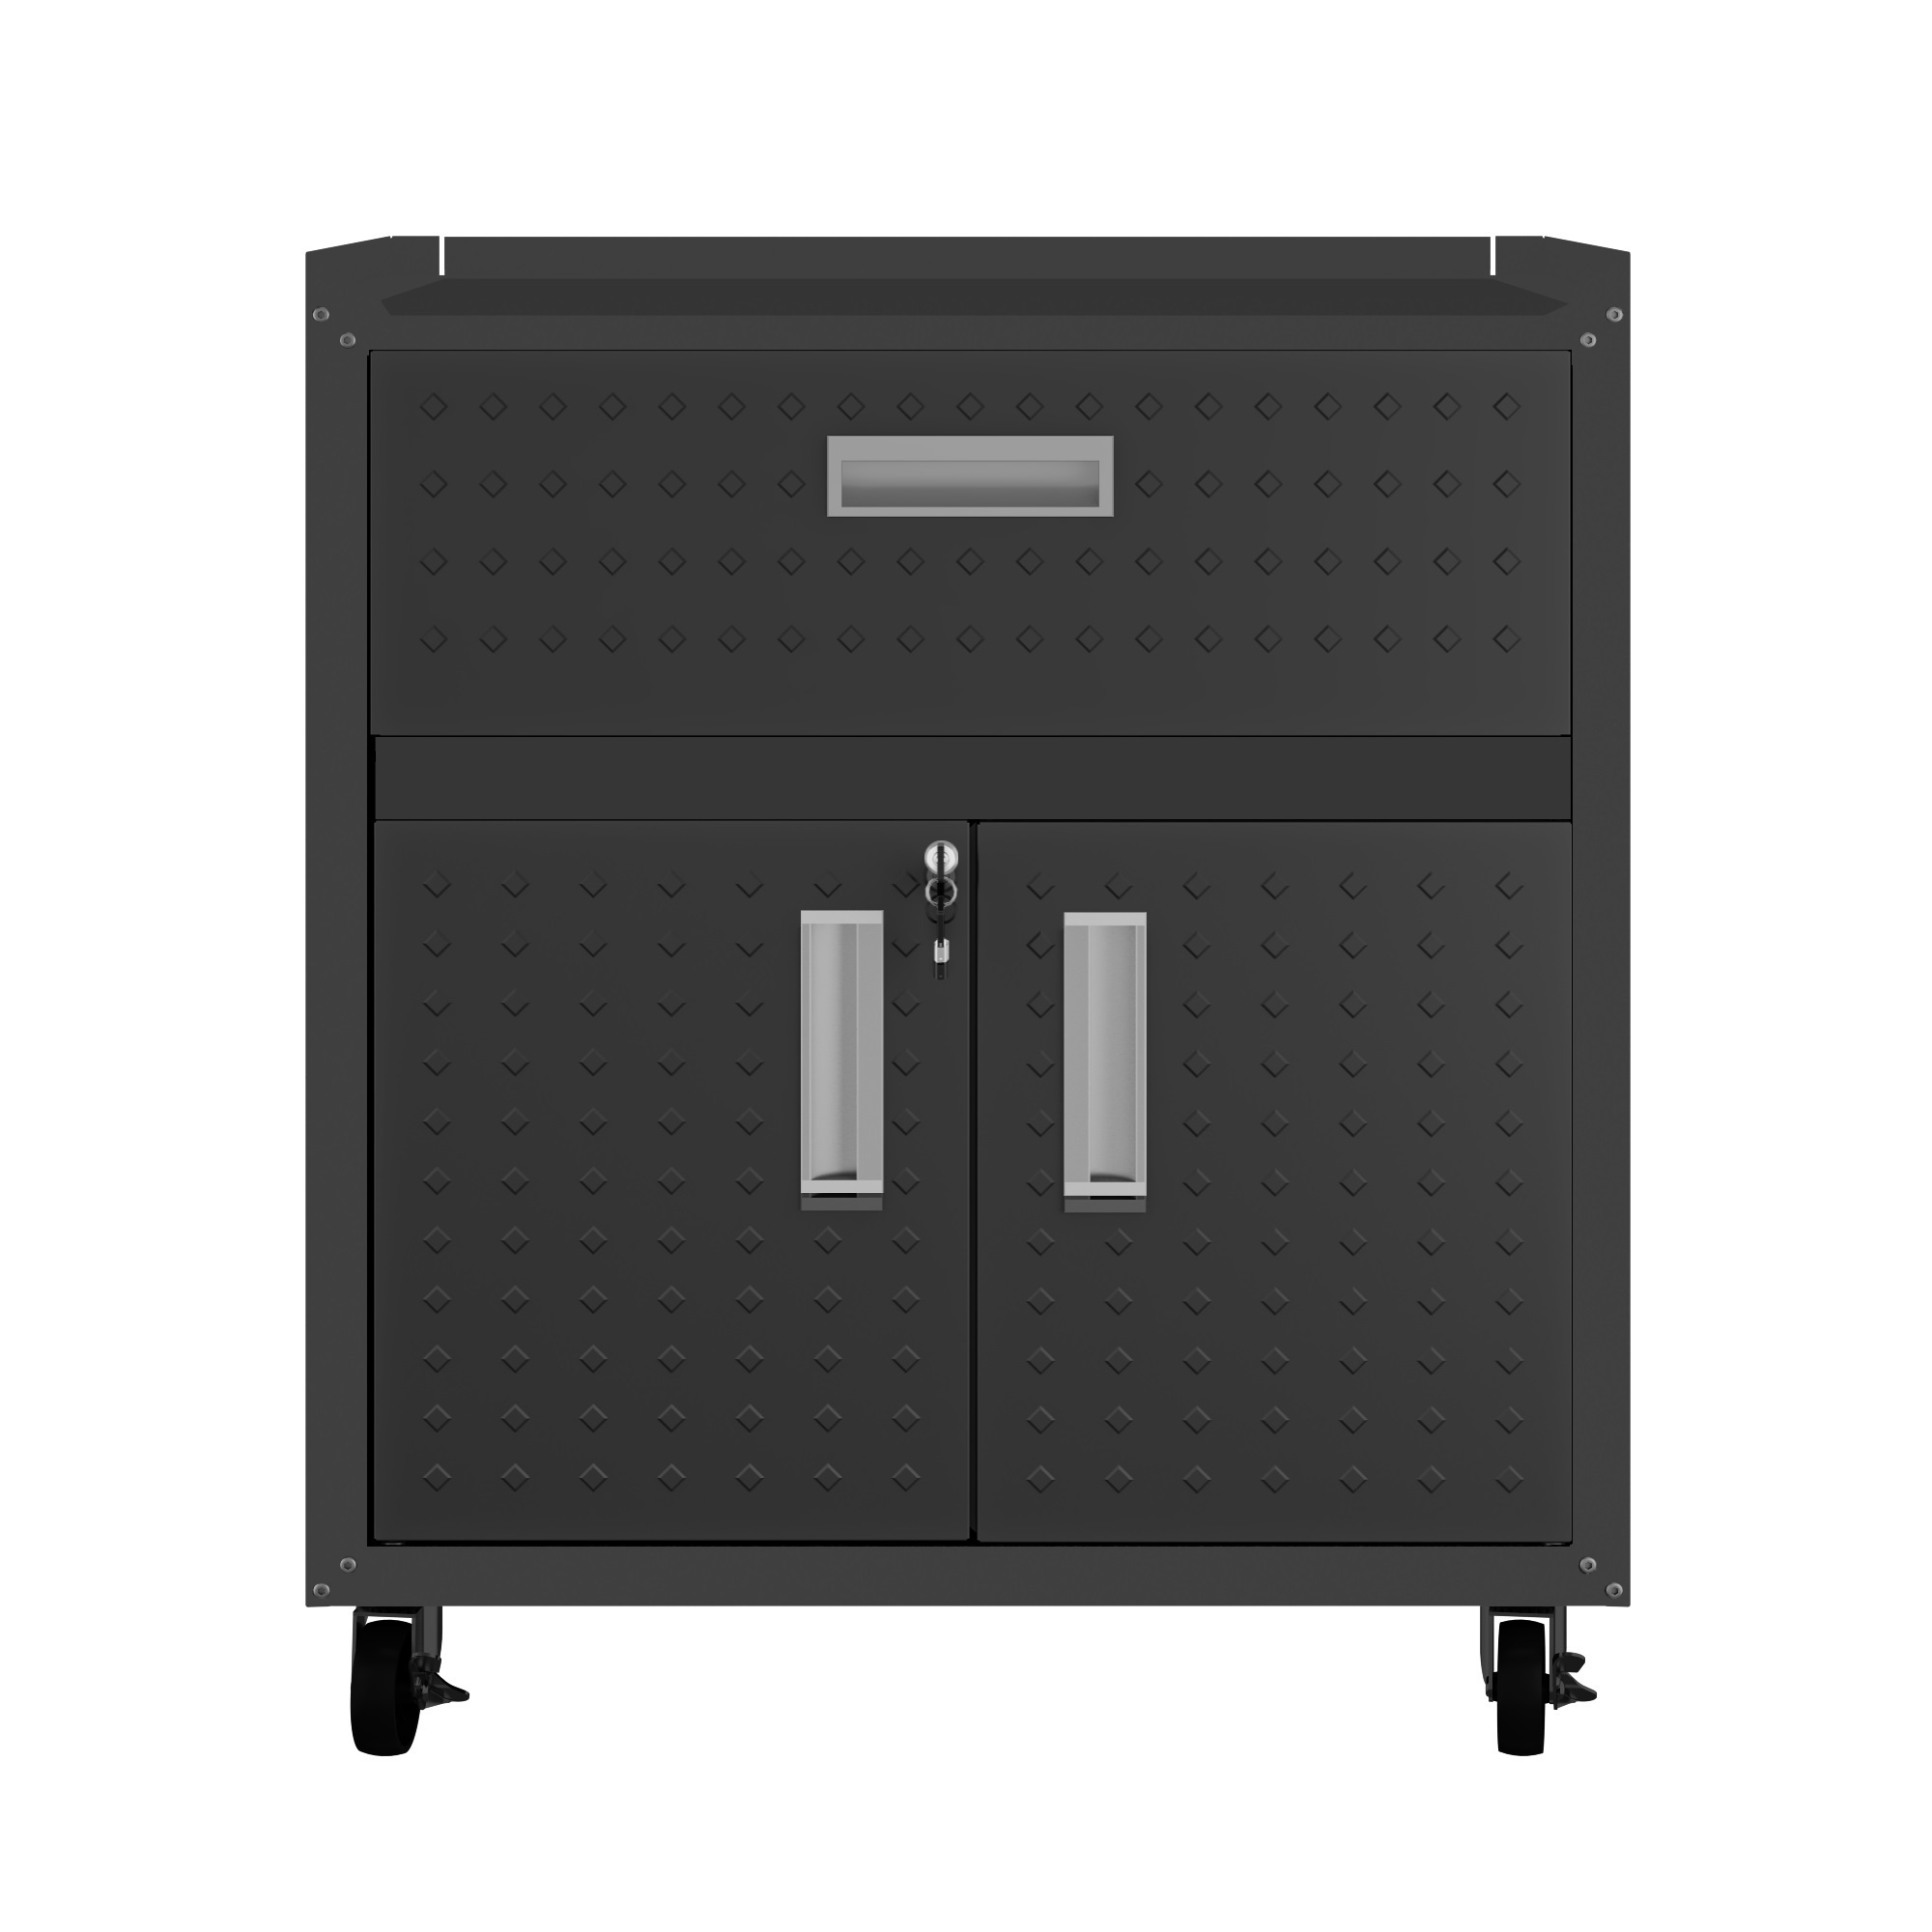 Manhattan Comfort, Fortress Mobile Garage Cabinet in Charcoal Grey, Height 31.5 in, Width 30.3 in, Color Dark Gray, Model 2GMCC